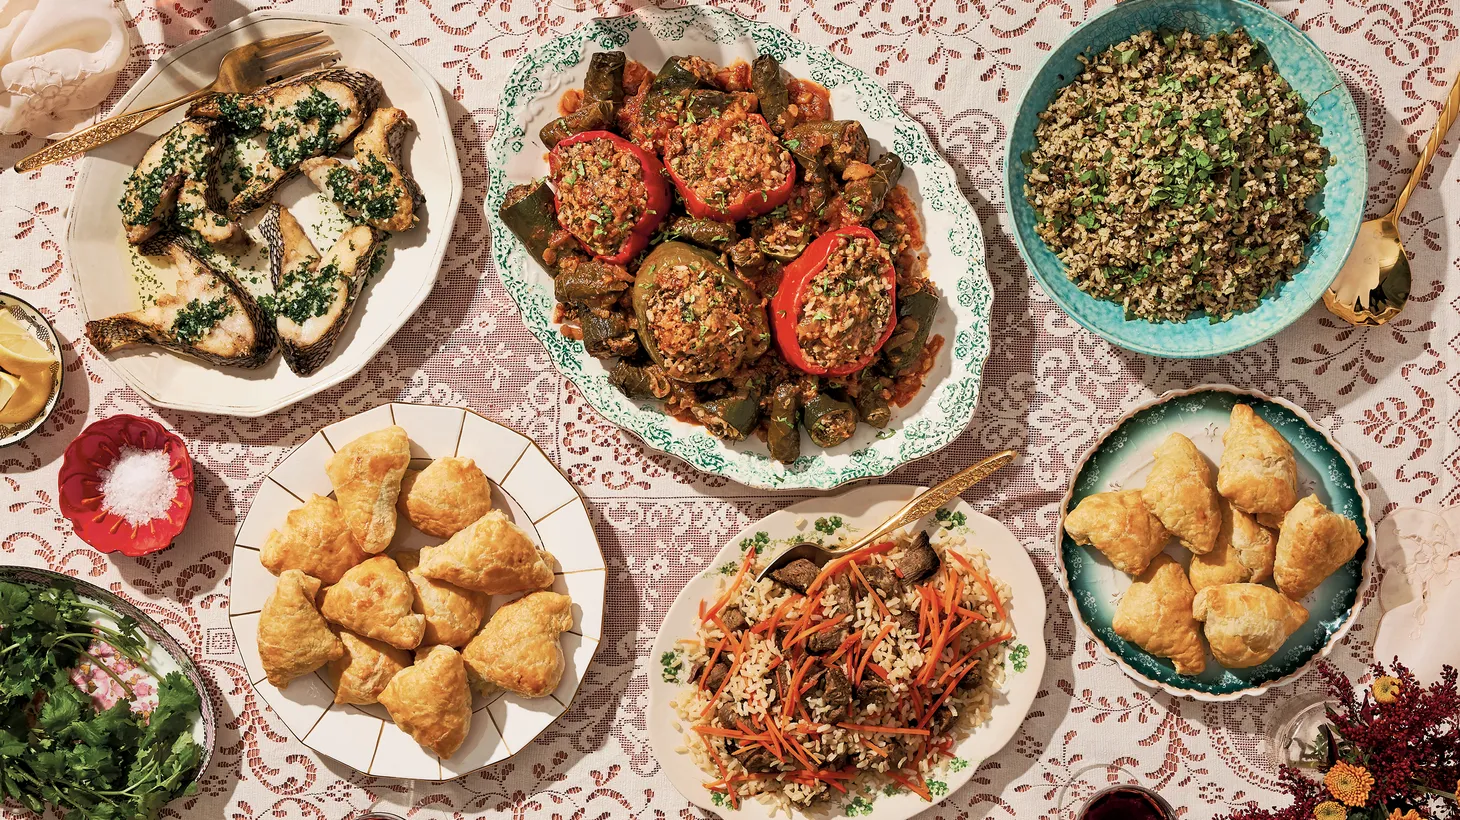 For Dr. Svetlana Davydov, whose Bukharian Jewish family hails from Central Asia, a Sukkot meal might include stuffed bell peppers and grape leaves, bakhsh (rice with beef and herbs), samsa (pastries stuffed with beef and squash), plov (rice pilaf with beef), and fried carp with garlic and cilantro.